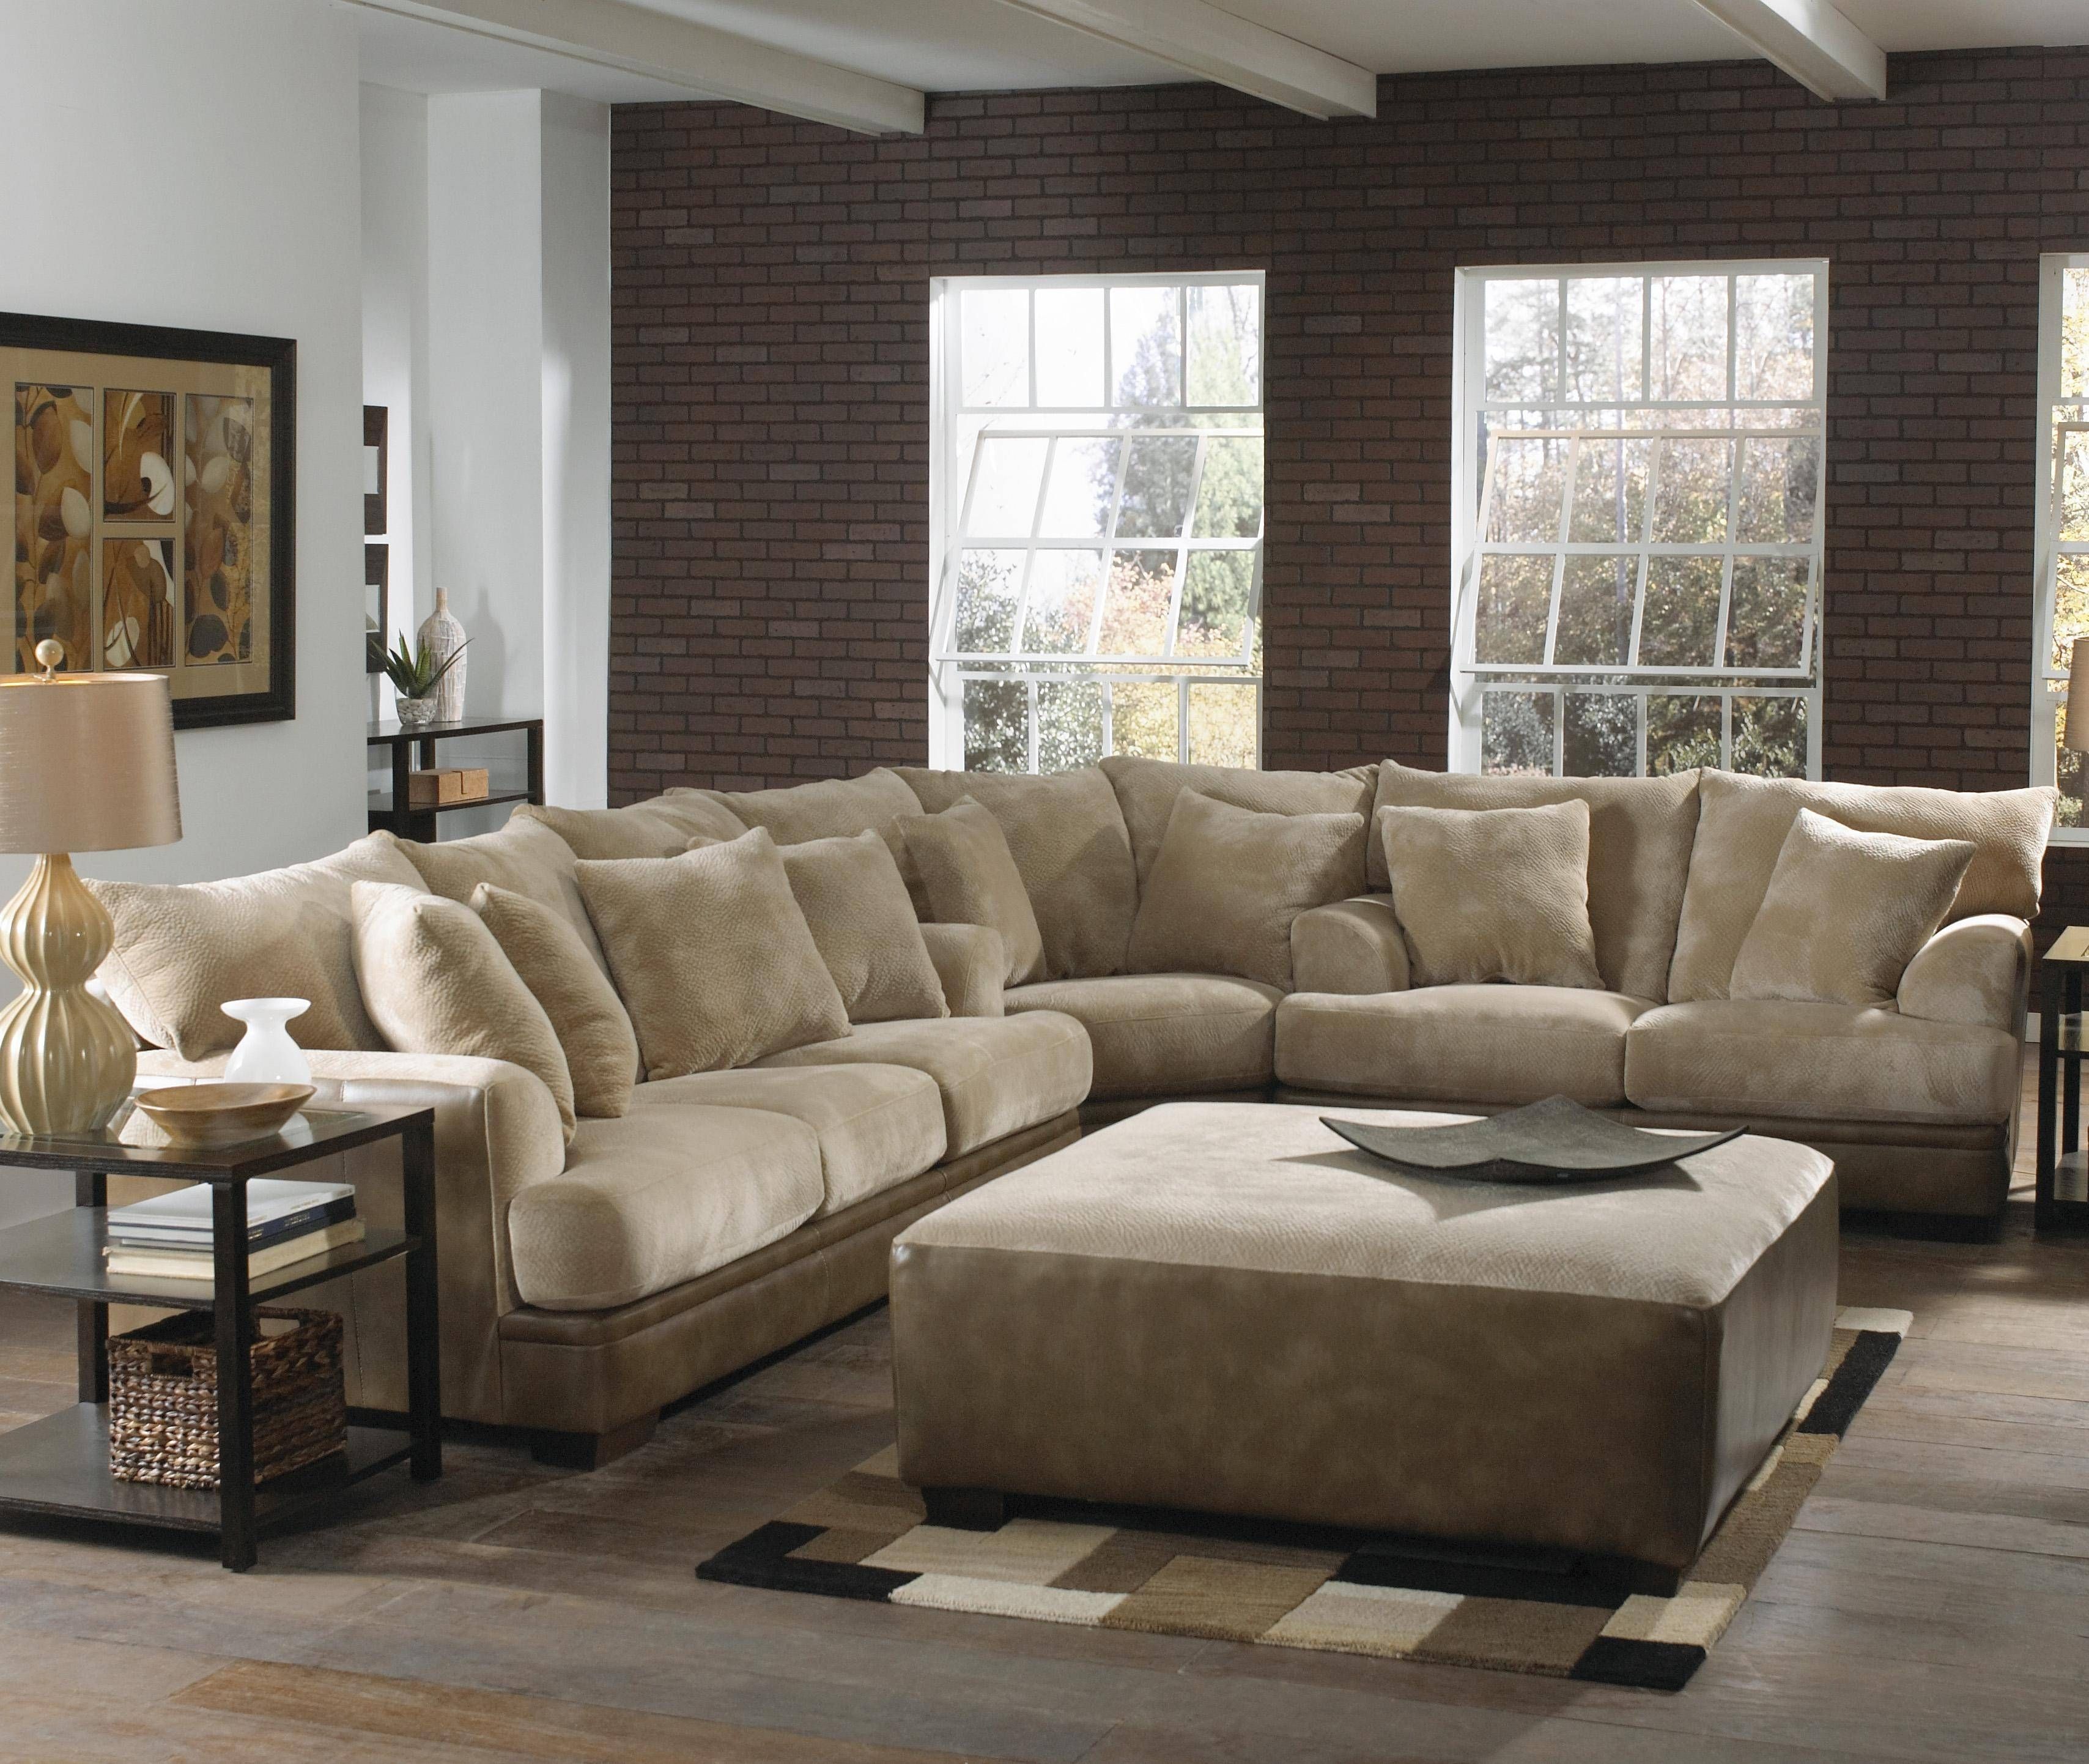 12 Best Collection Of Extra Wide Sectional Sofas Regarding Extra Wide Sectional Sofas (Photo 4 of 30)